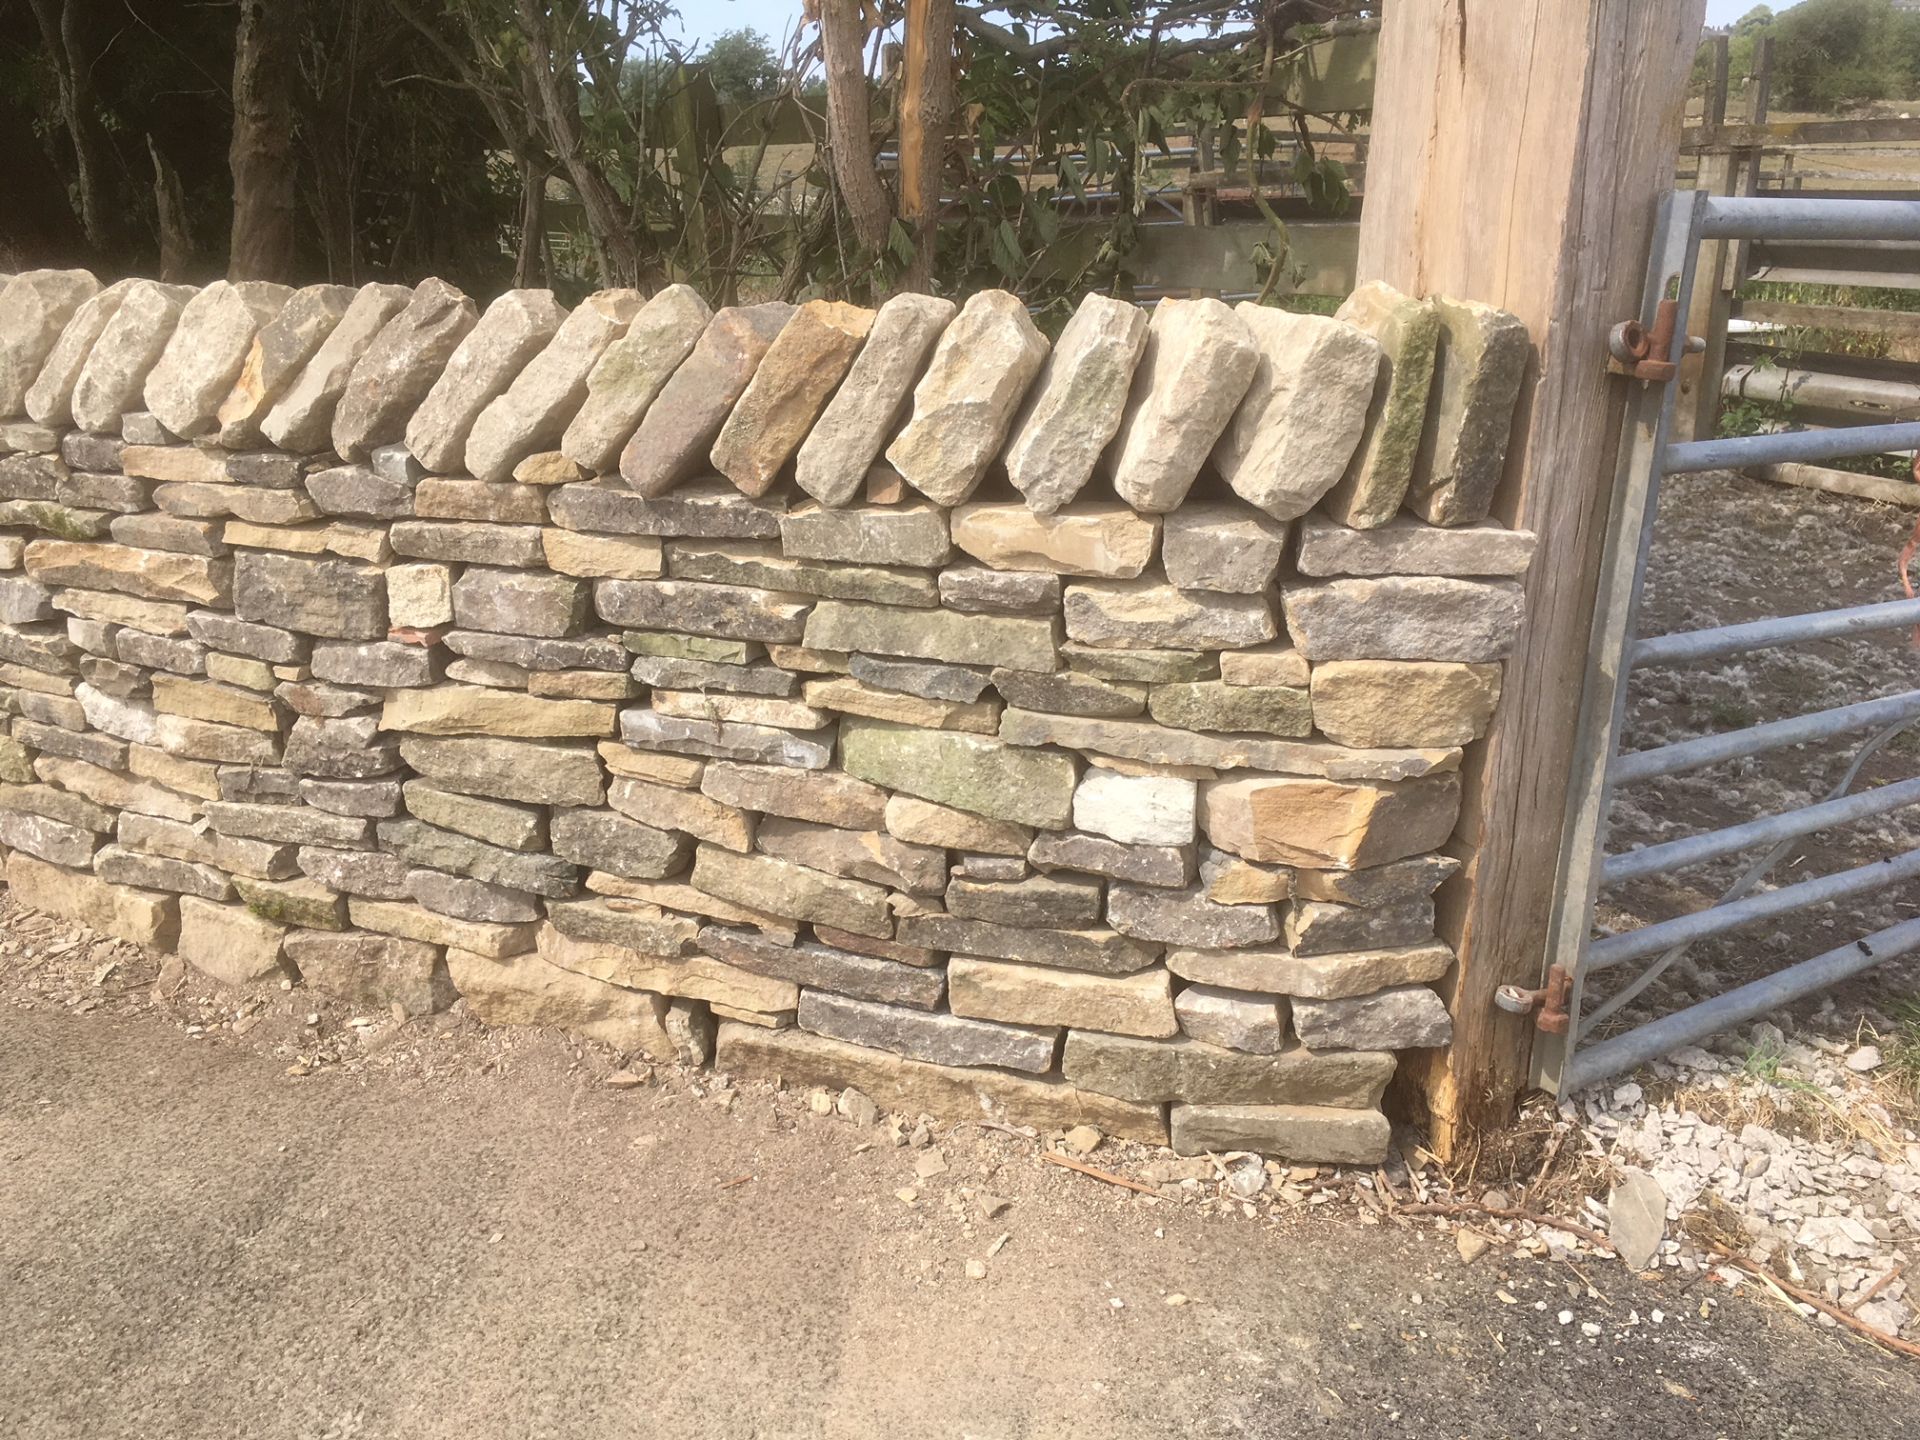 10 bulk bags Yorkshire Dry Stone Walling, each bag 1tonne, which approximately equates to 1m² of - Image 6 of 9